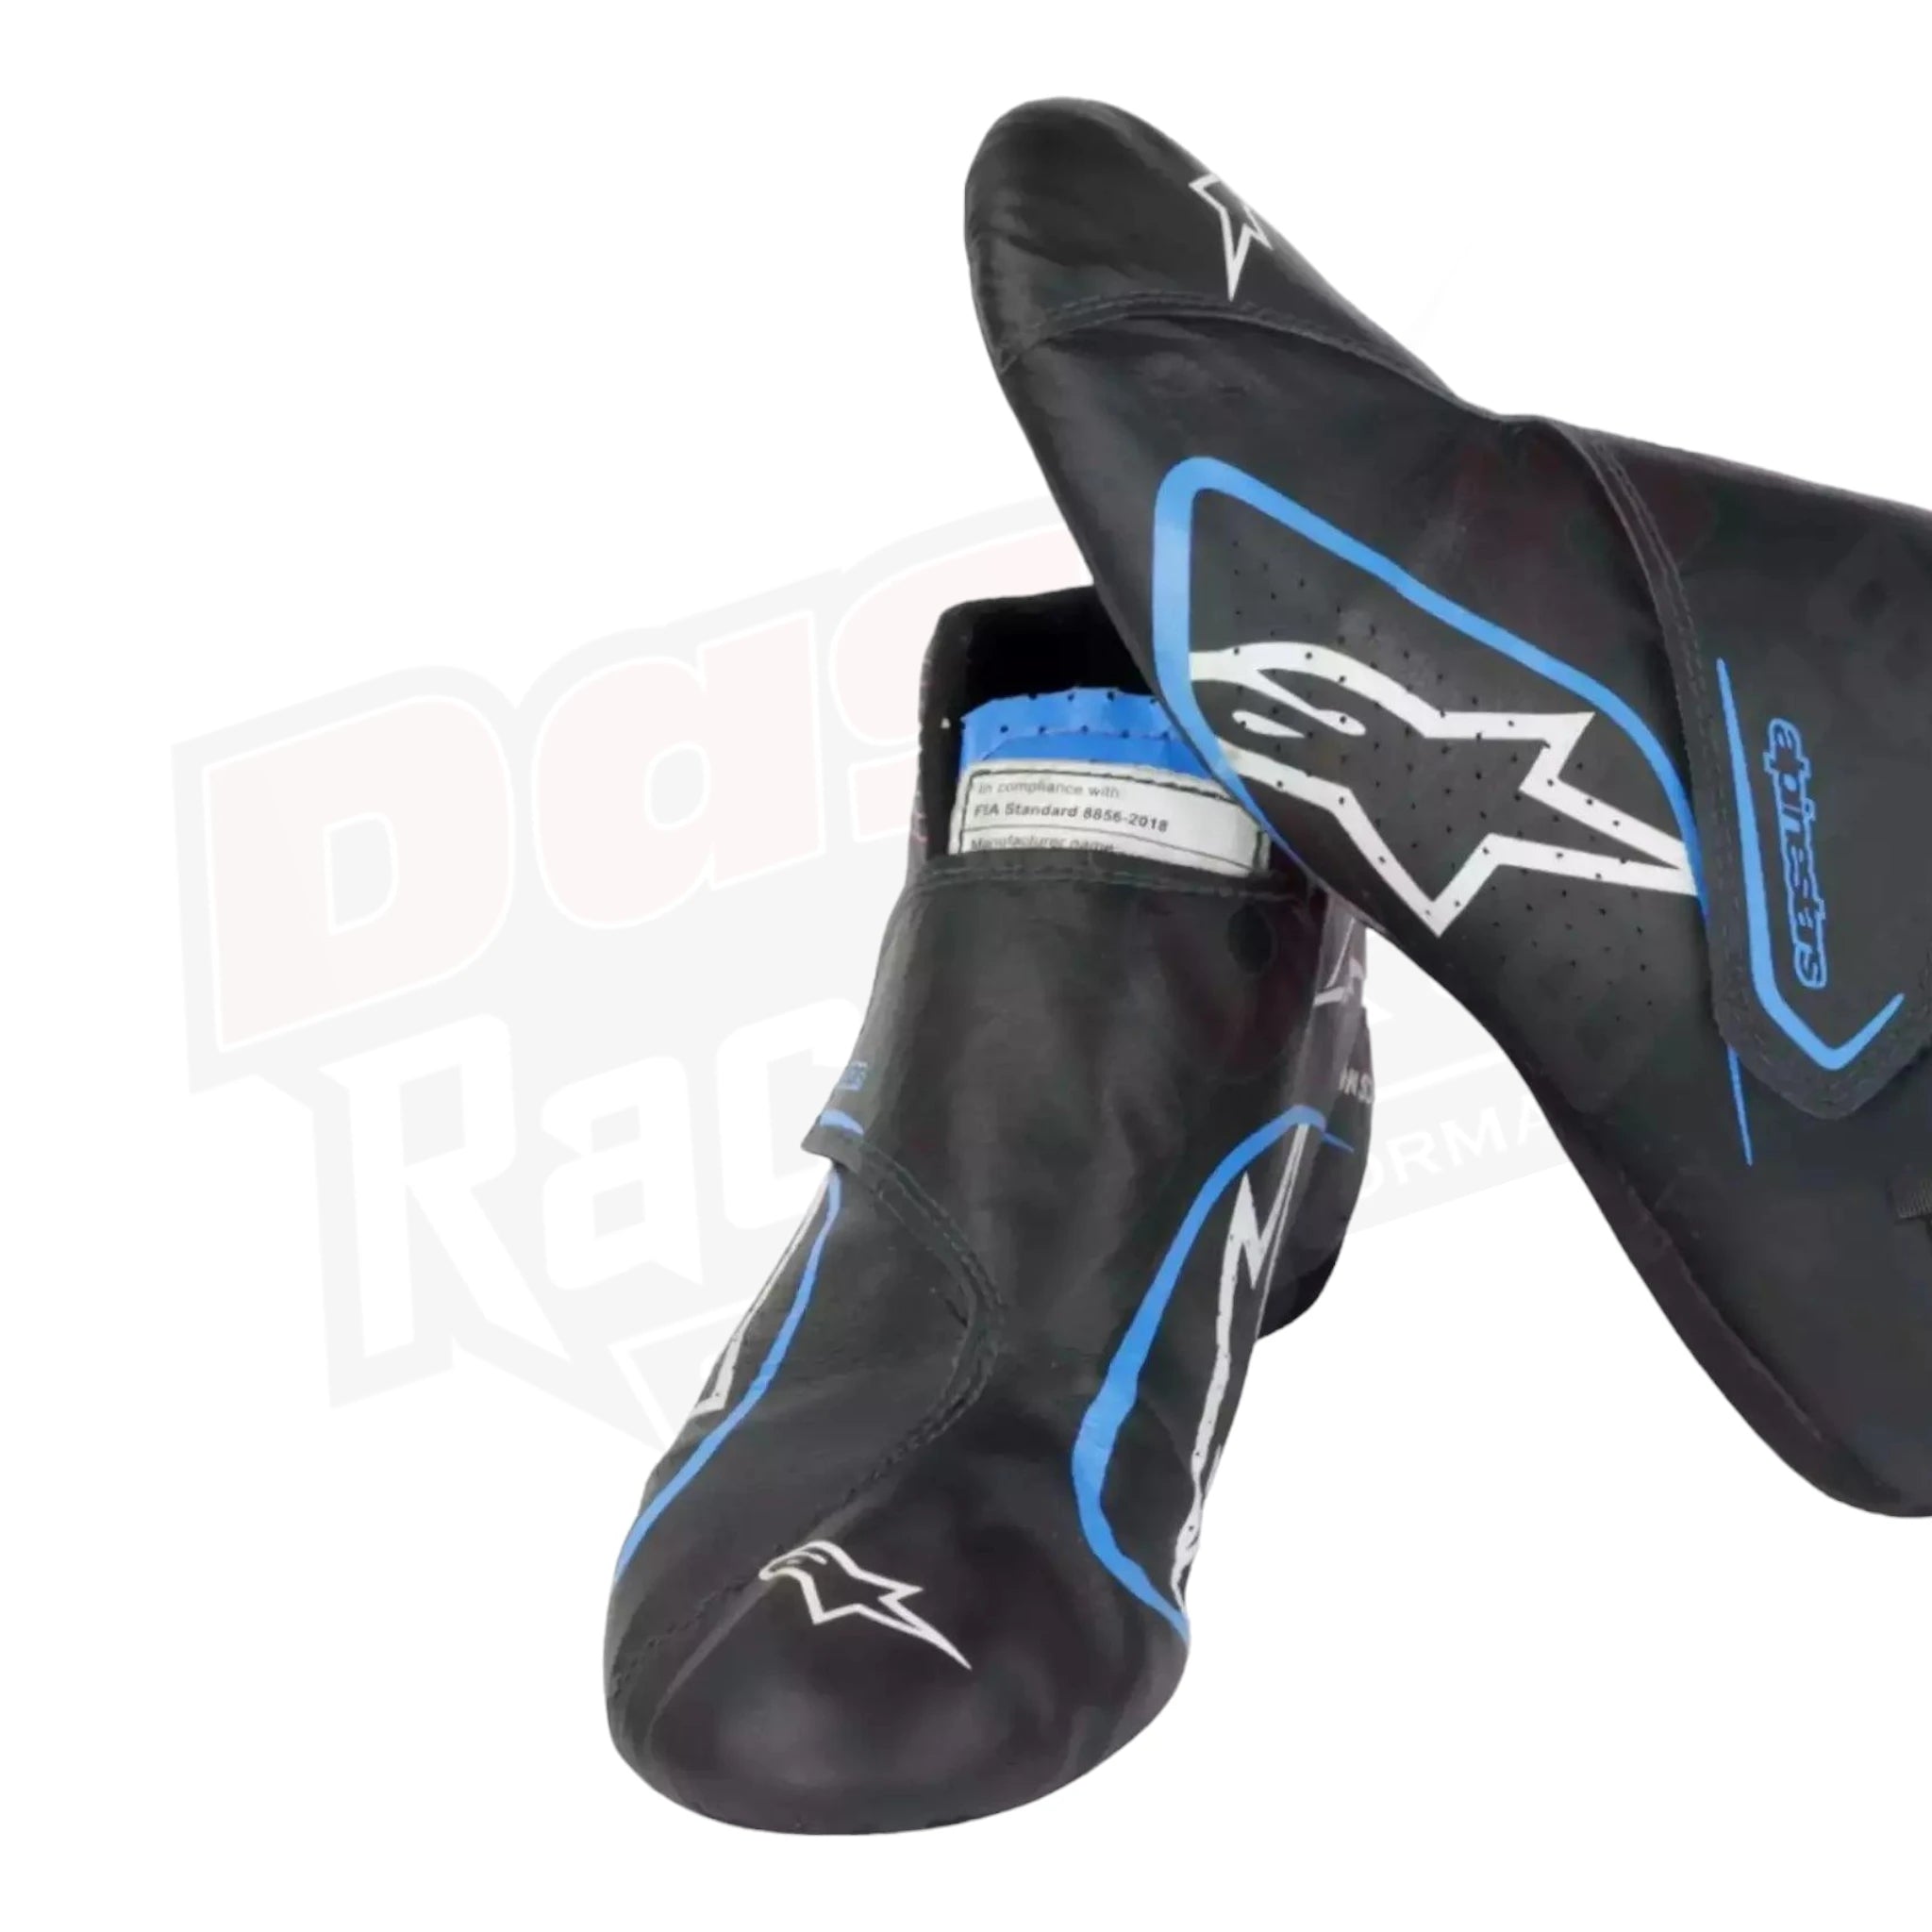 2019 GEORGE RUSSELL Williams Racing F1 Race Boots